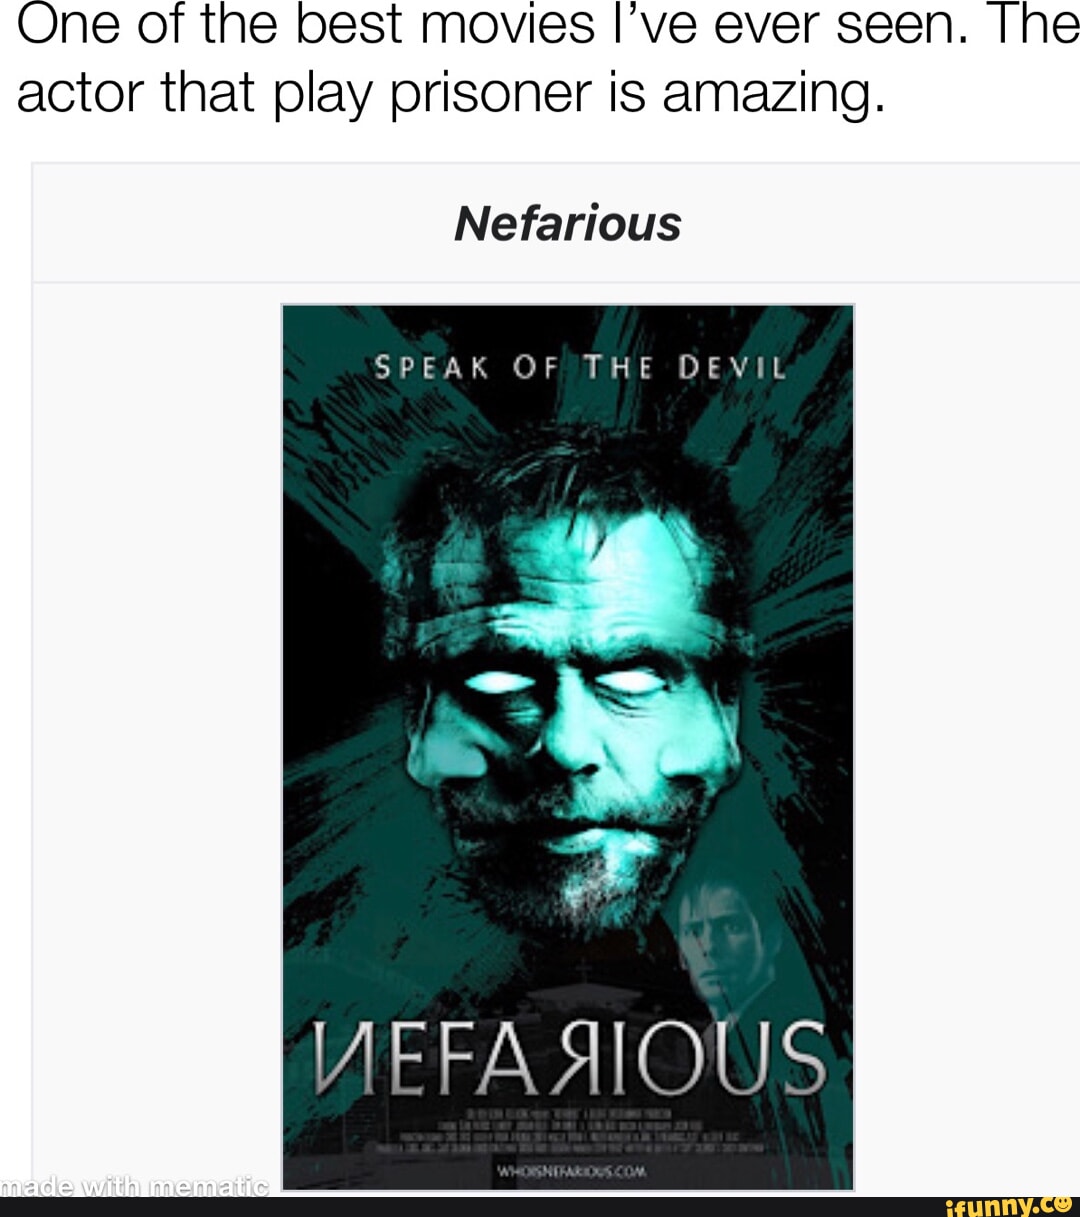 One of the best movies I've ever seen. [he actor that play prisoner is